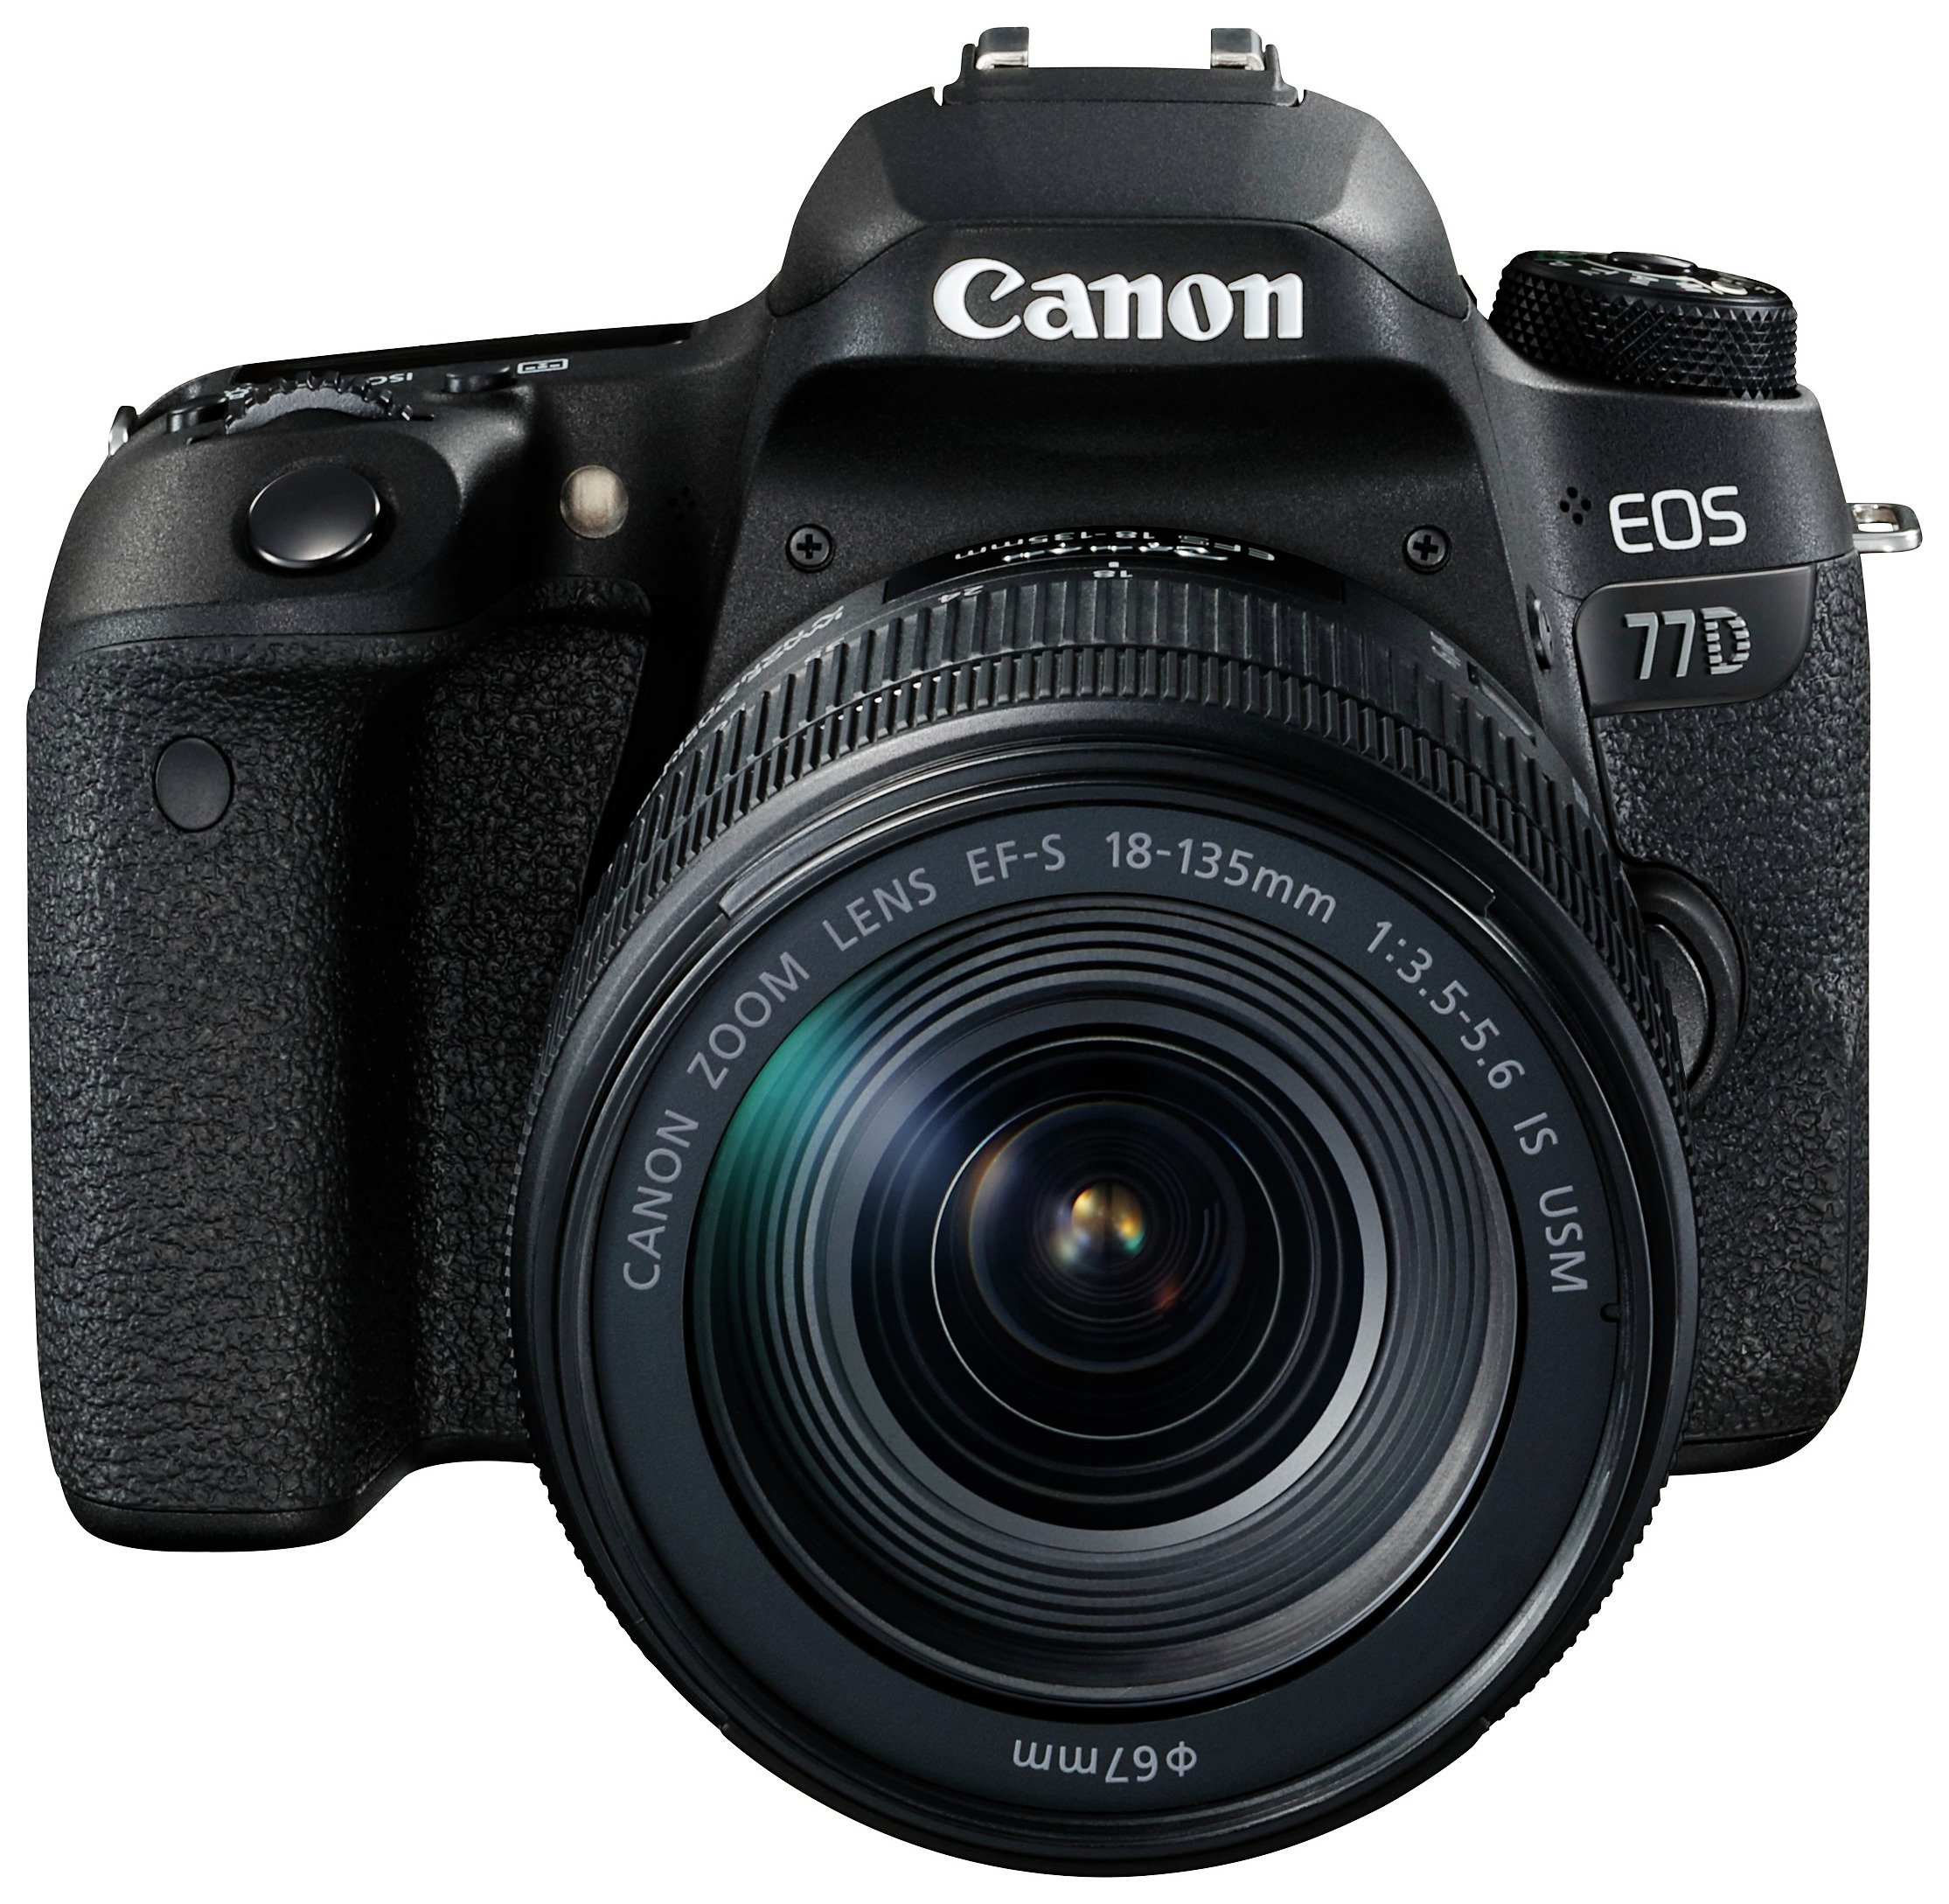 Canon EOS 77D DSLR Camera with 18-135mm IS USM Lens Review